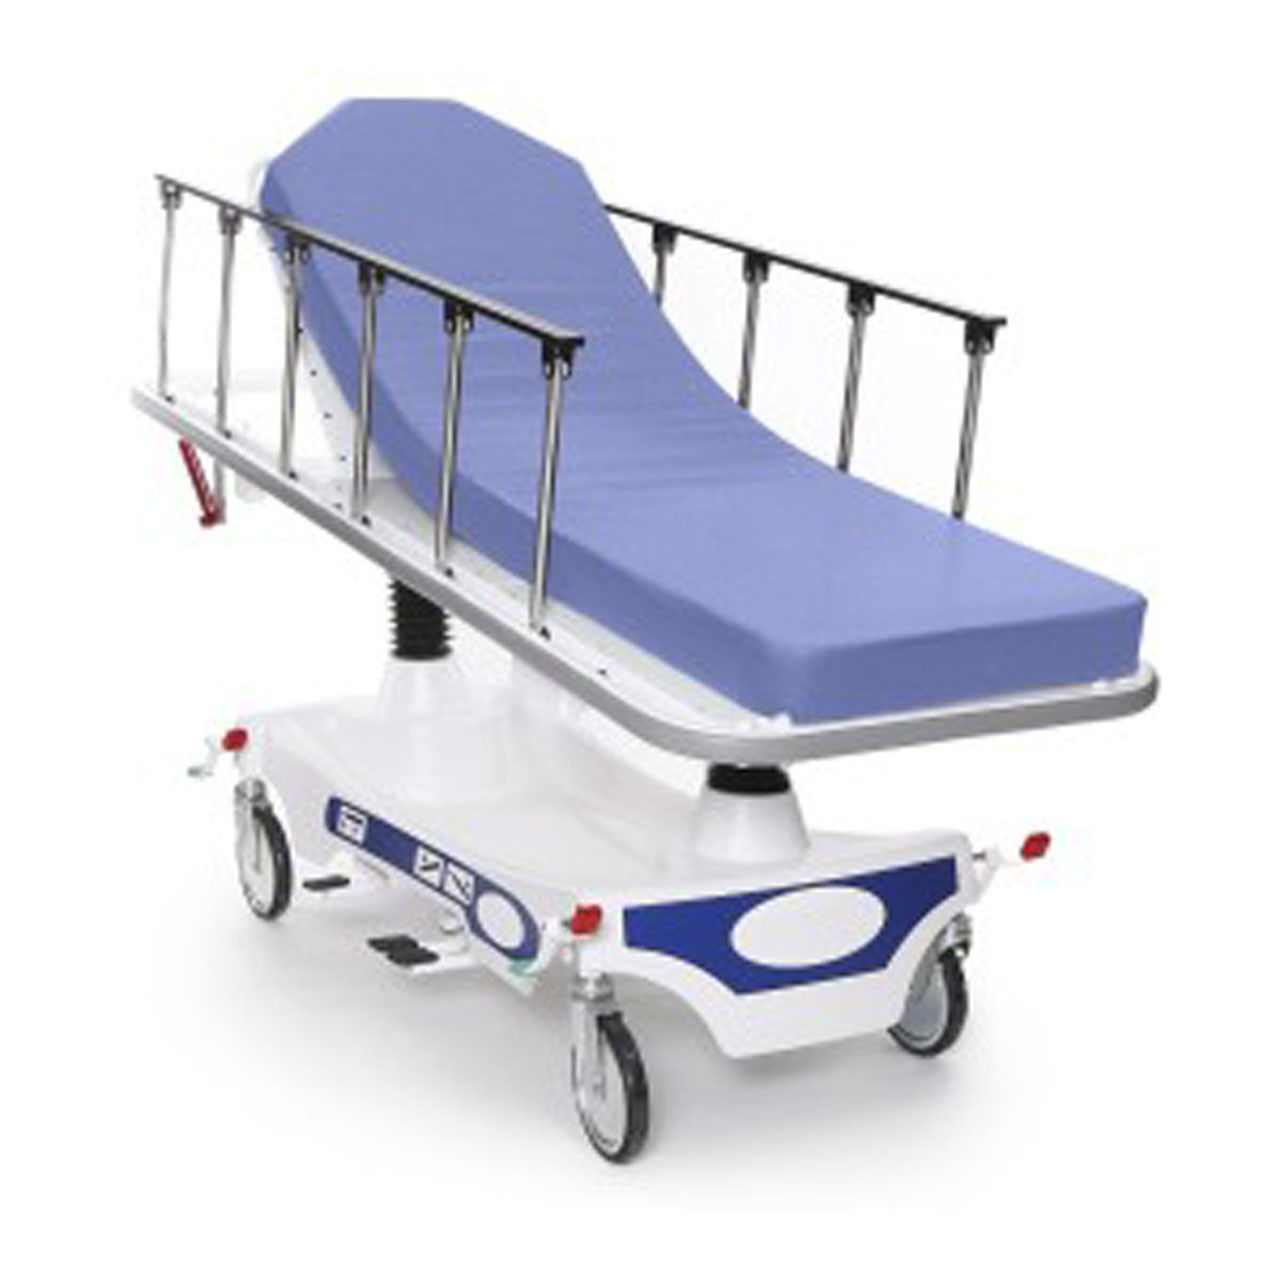 Where do the Fitted Stretcher Sheets ship from?